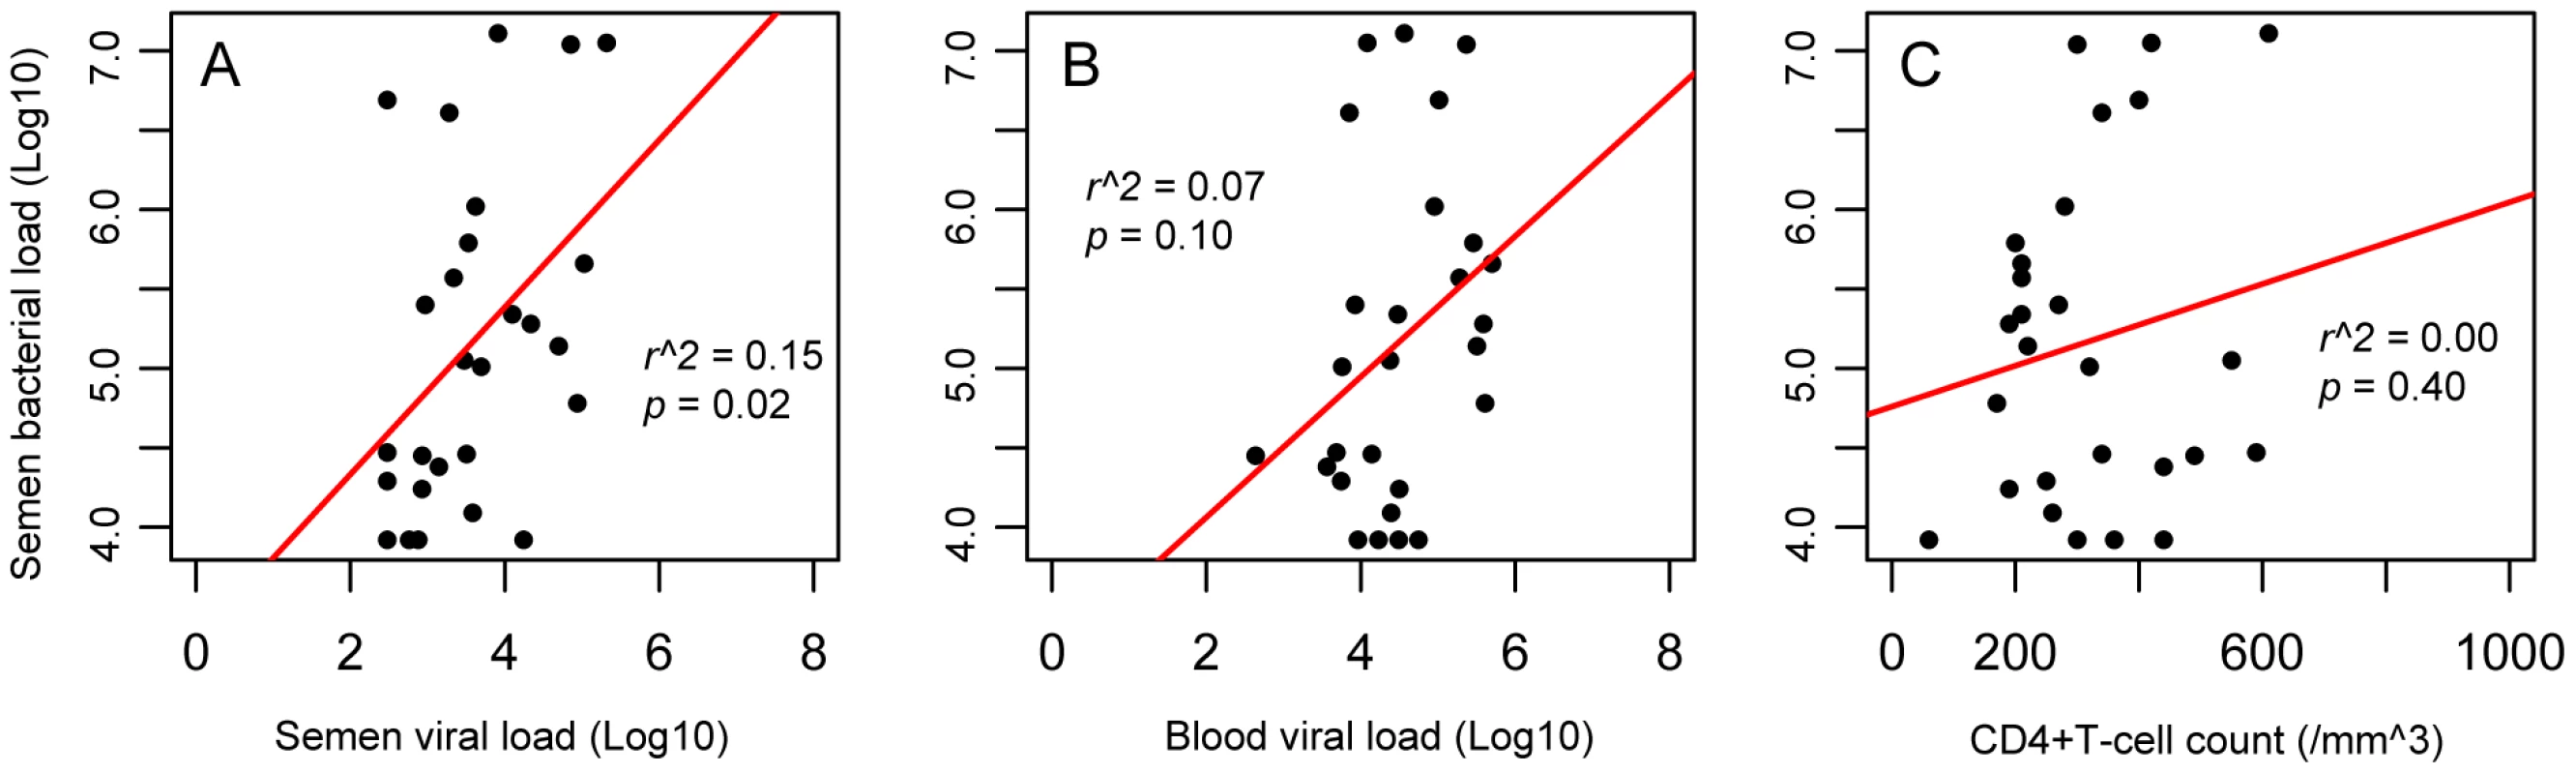 Correlation of semen bacterial load with CD4+ T-cell counts and viral loads in the semen and blood of HIV-infected men prior to antiretroviral treatment.